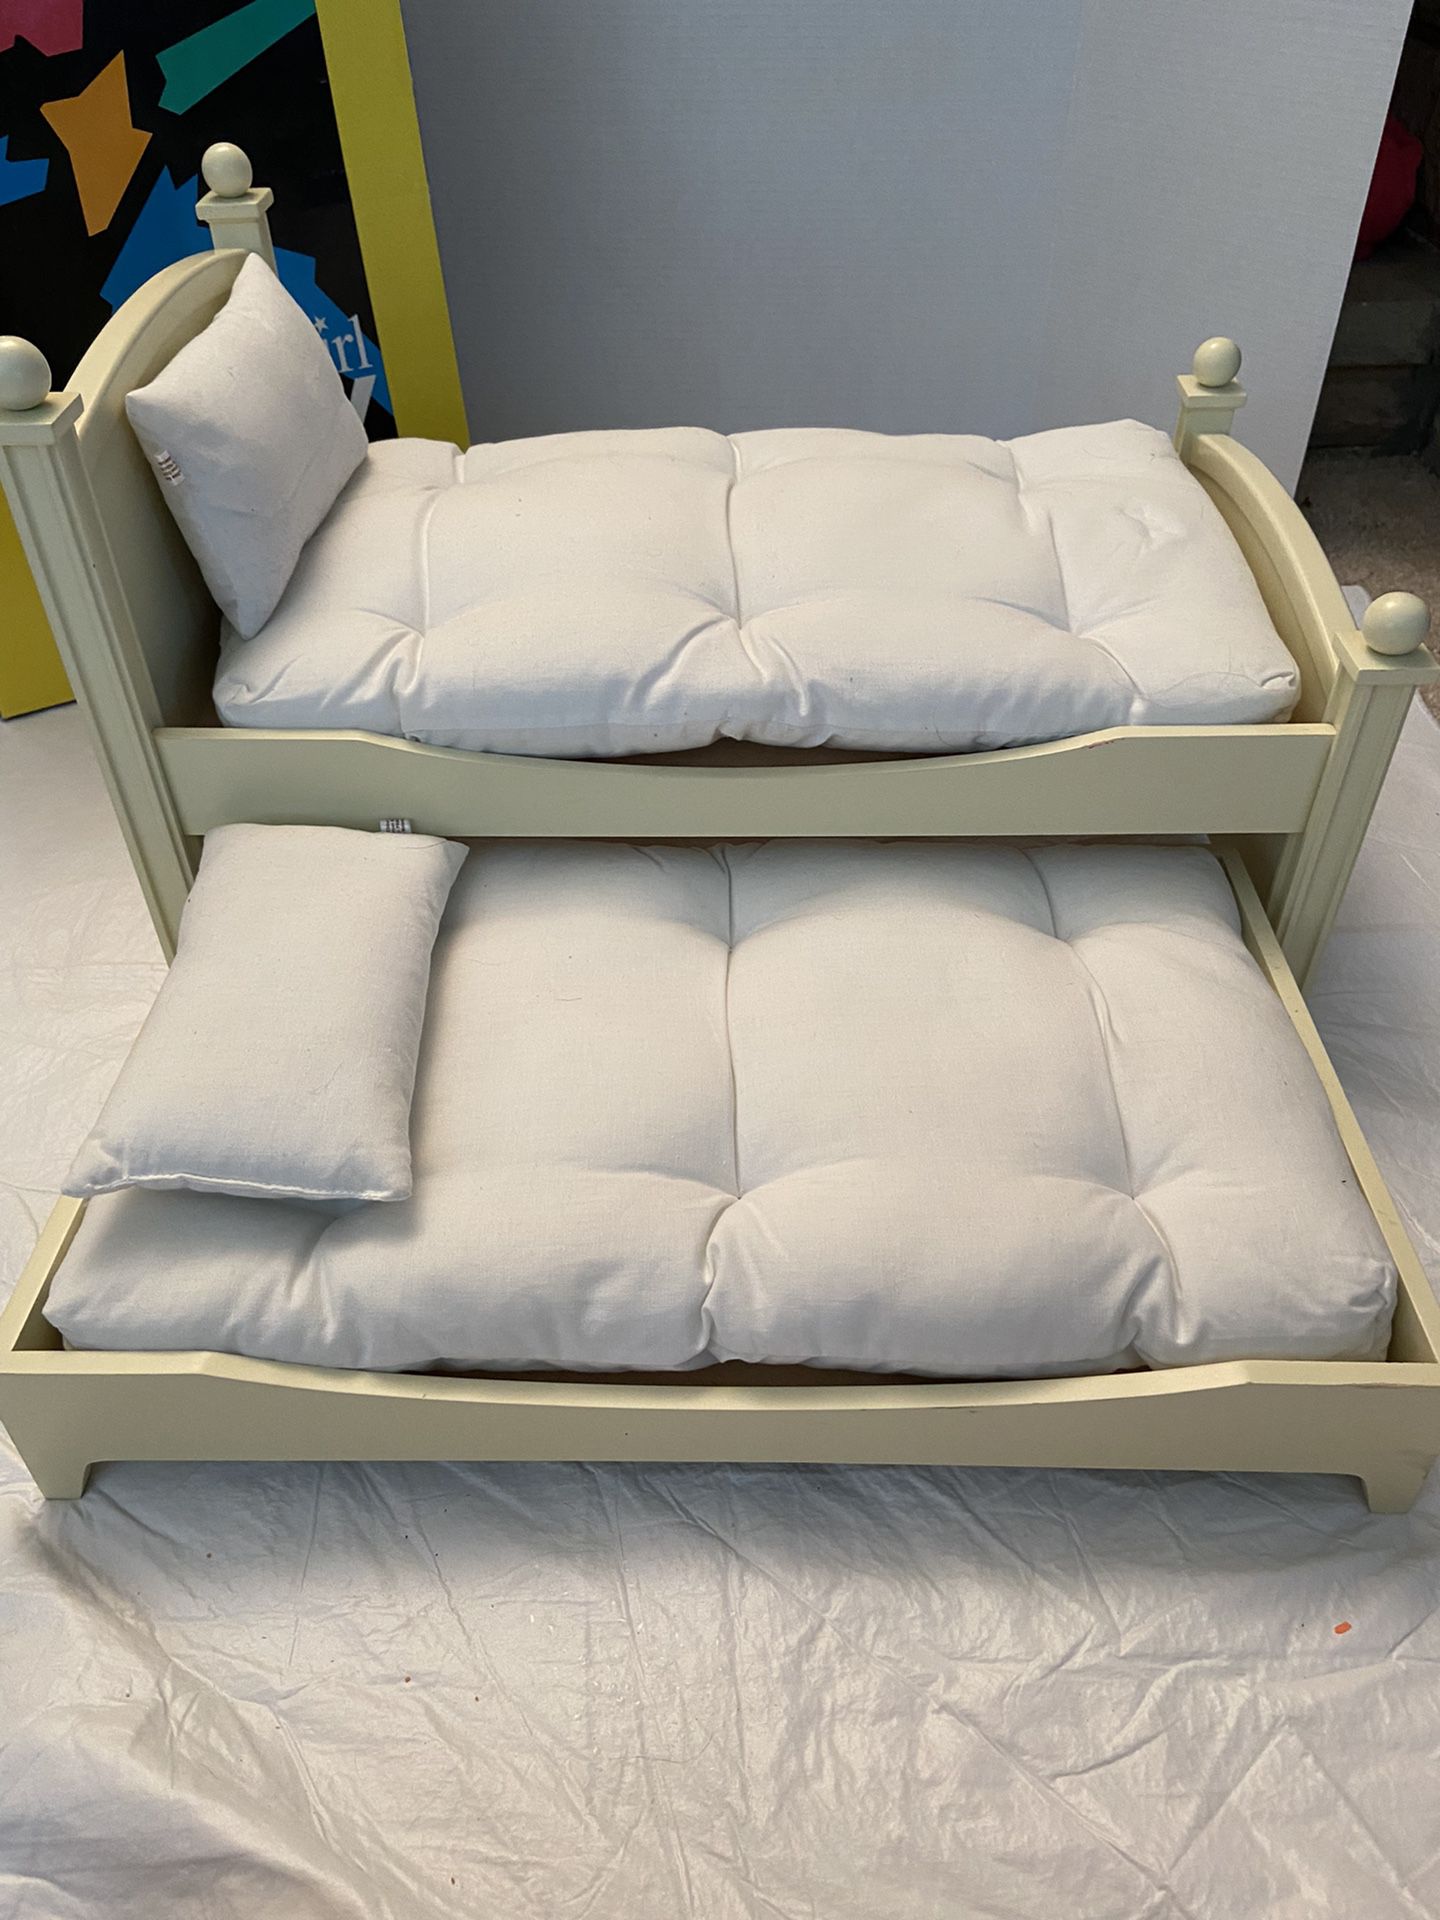 Trundle bed for American girl dolls